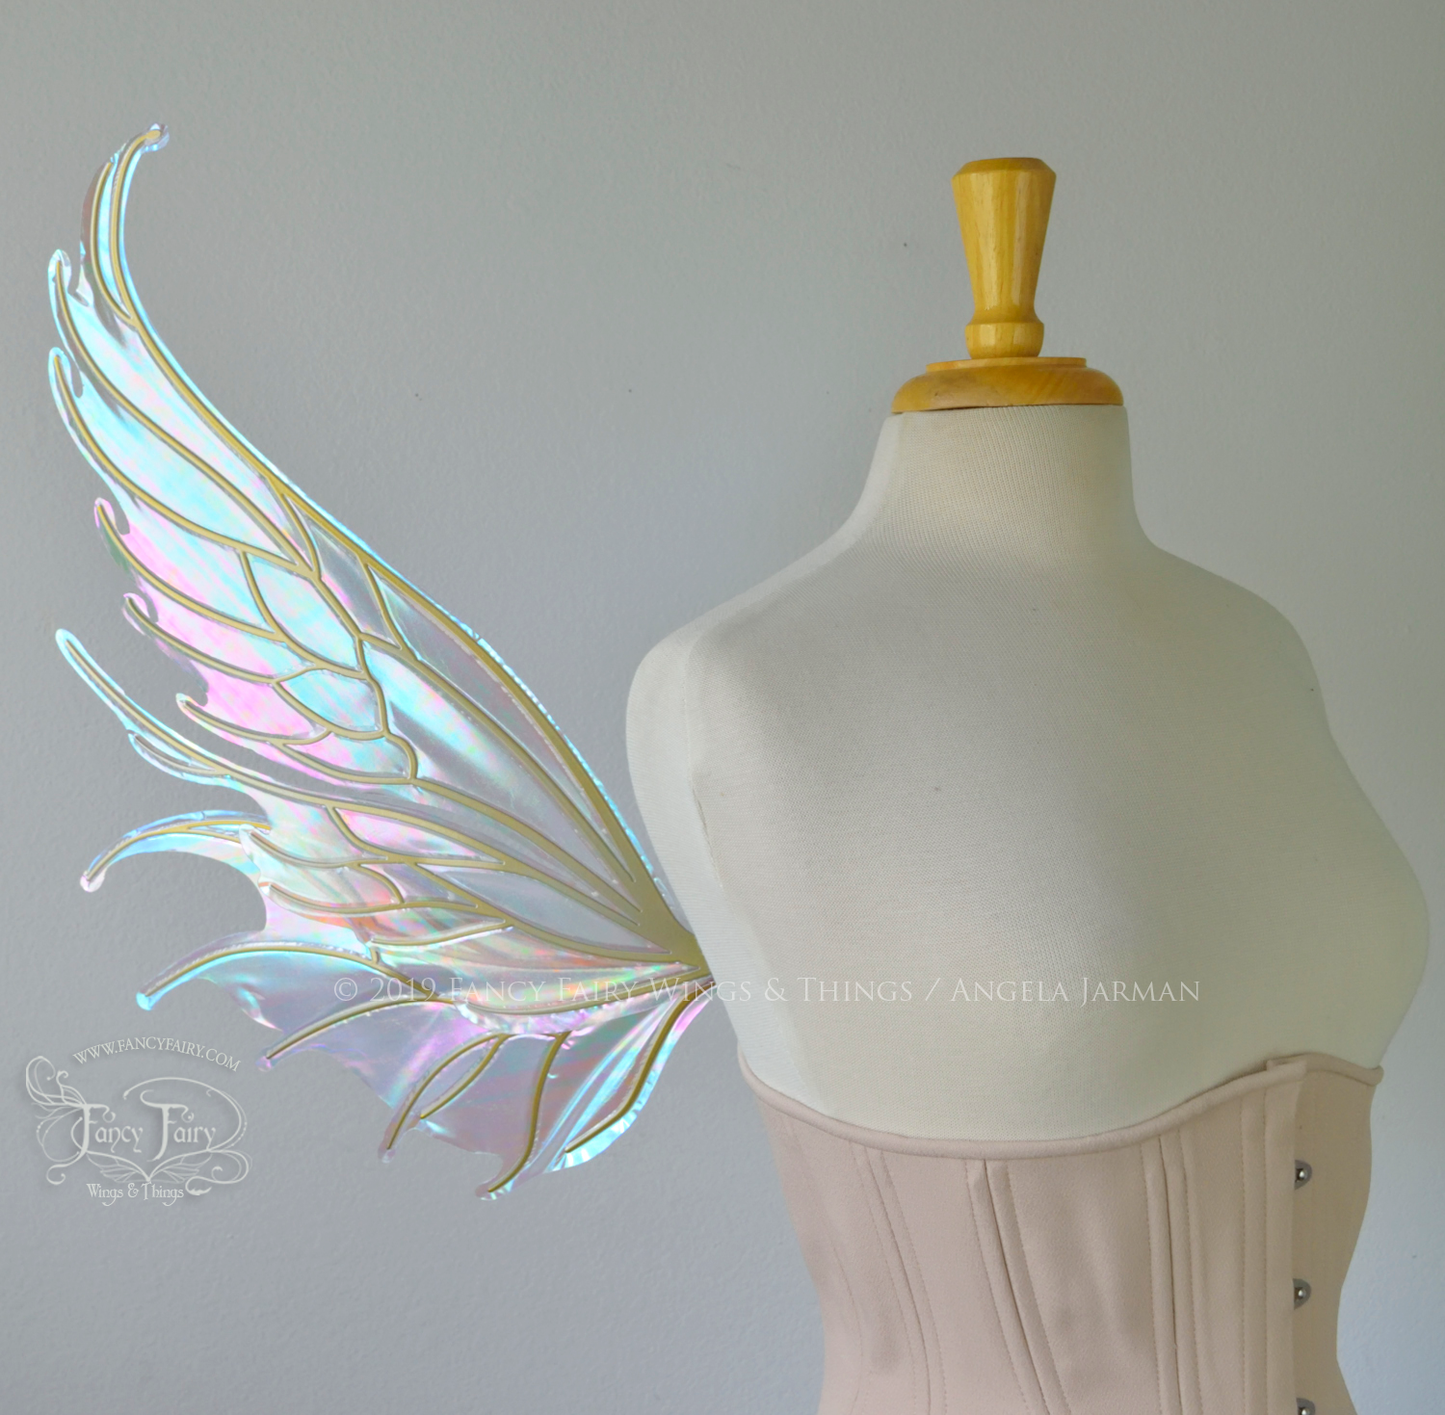 Aquatica Iridescent Convertible Fairy Wings in Opal with Candy Gold veins